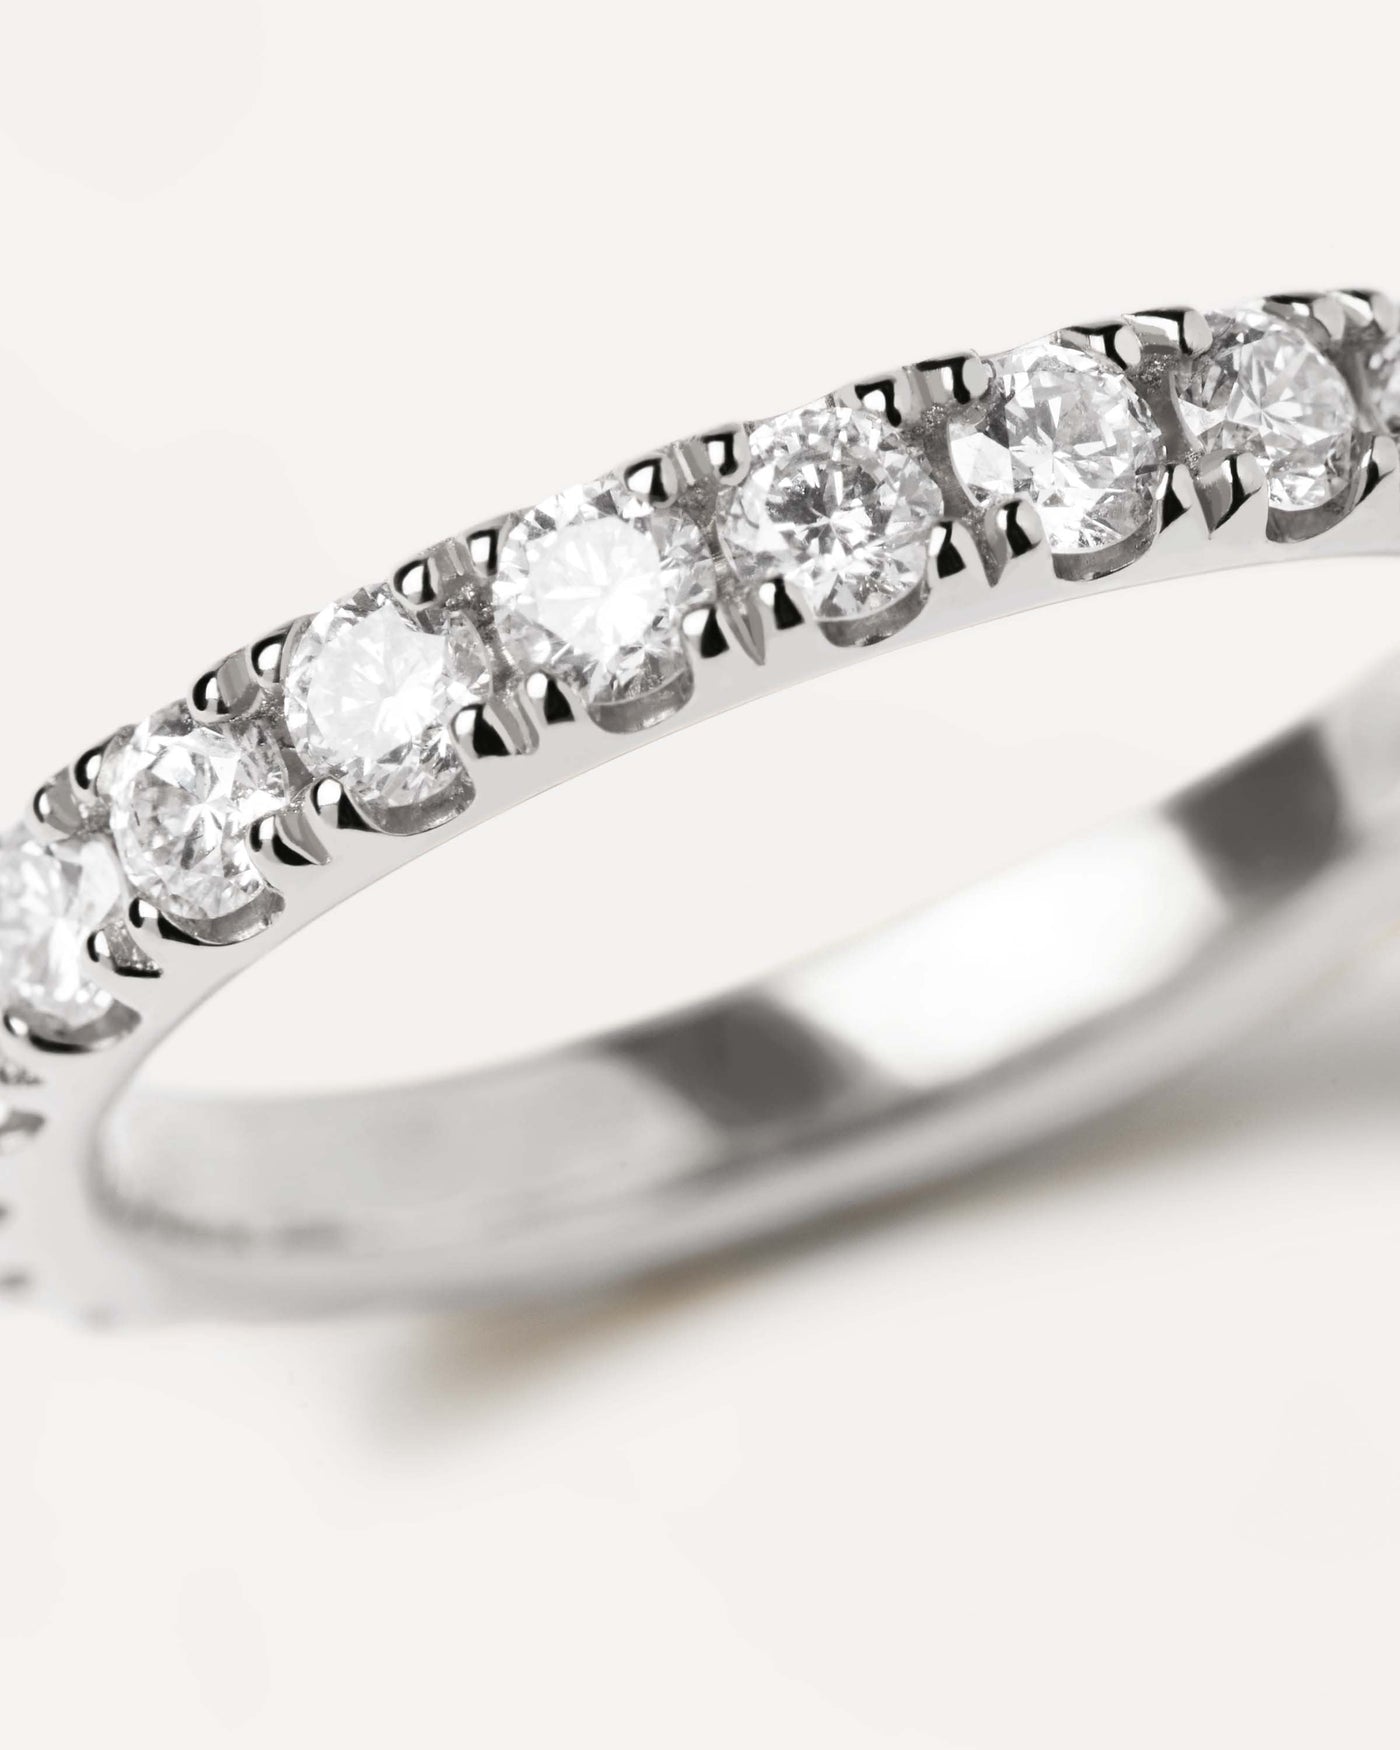 2023 Selection | Diamonds and White Gold Eternity Supreme Ring. 18K white gold eternity ring, set with big lab-grown diamonds, equaling 1.55 carats. Get the latest arrival from PDPAOLA. Place your order safely and get this Best Seller. Free Shipping.